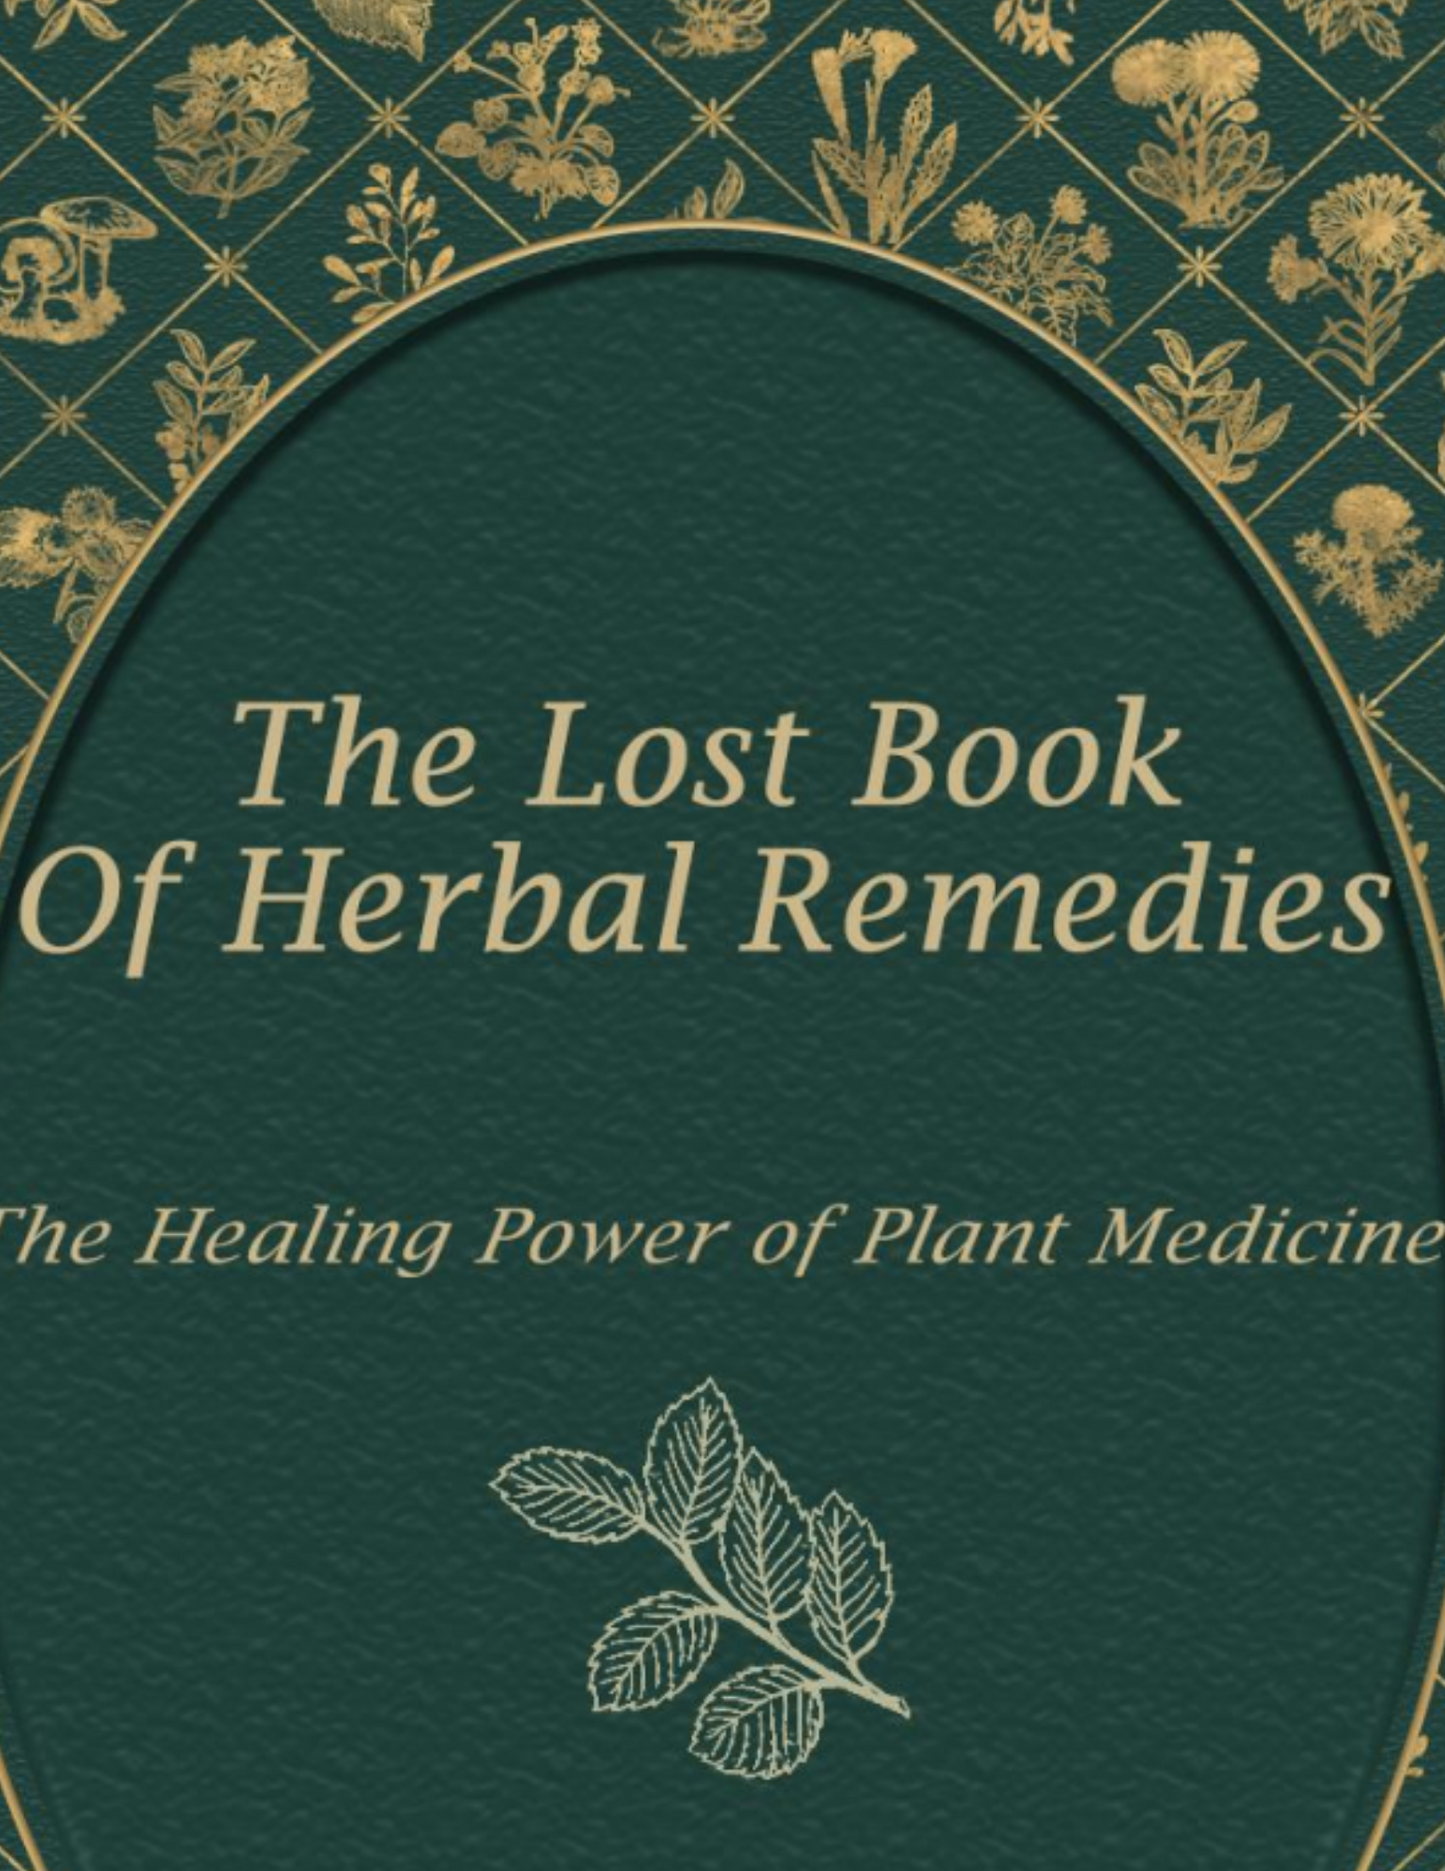 The Lost Book of Herbal Remedies | Ebook Instant Download | Holistic healing Guide | 800+ remedies | Colorful Photos